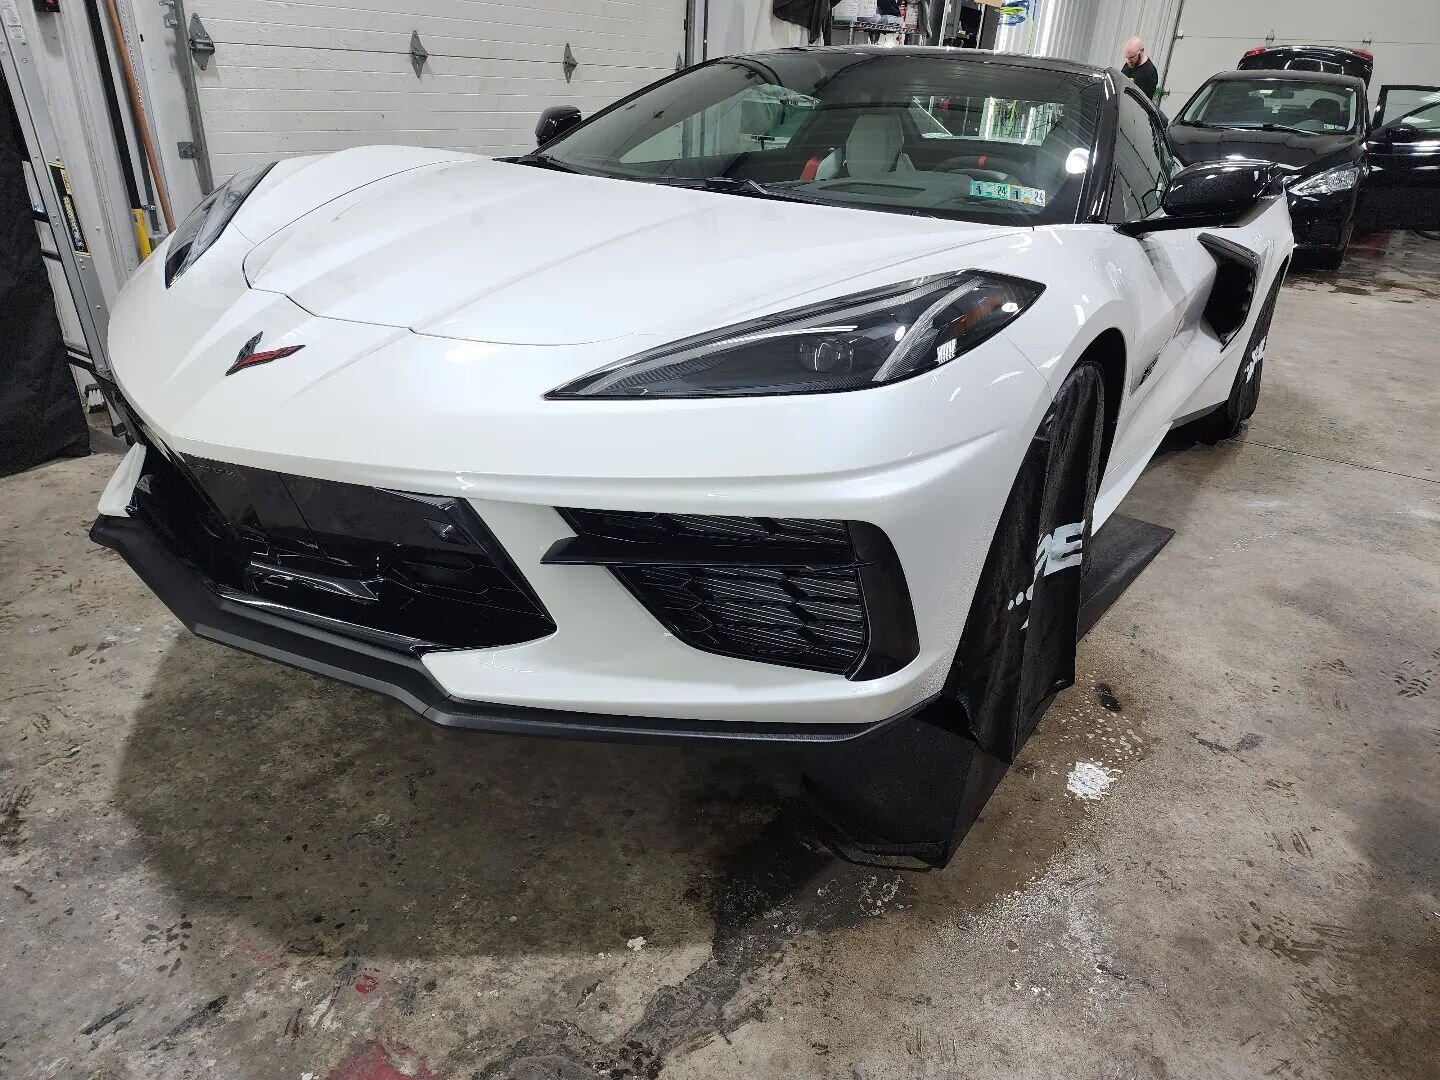 C8 70th anniversary edition came in for our Xpel PPF Track package + ceramic coating